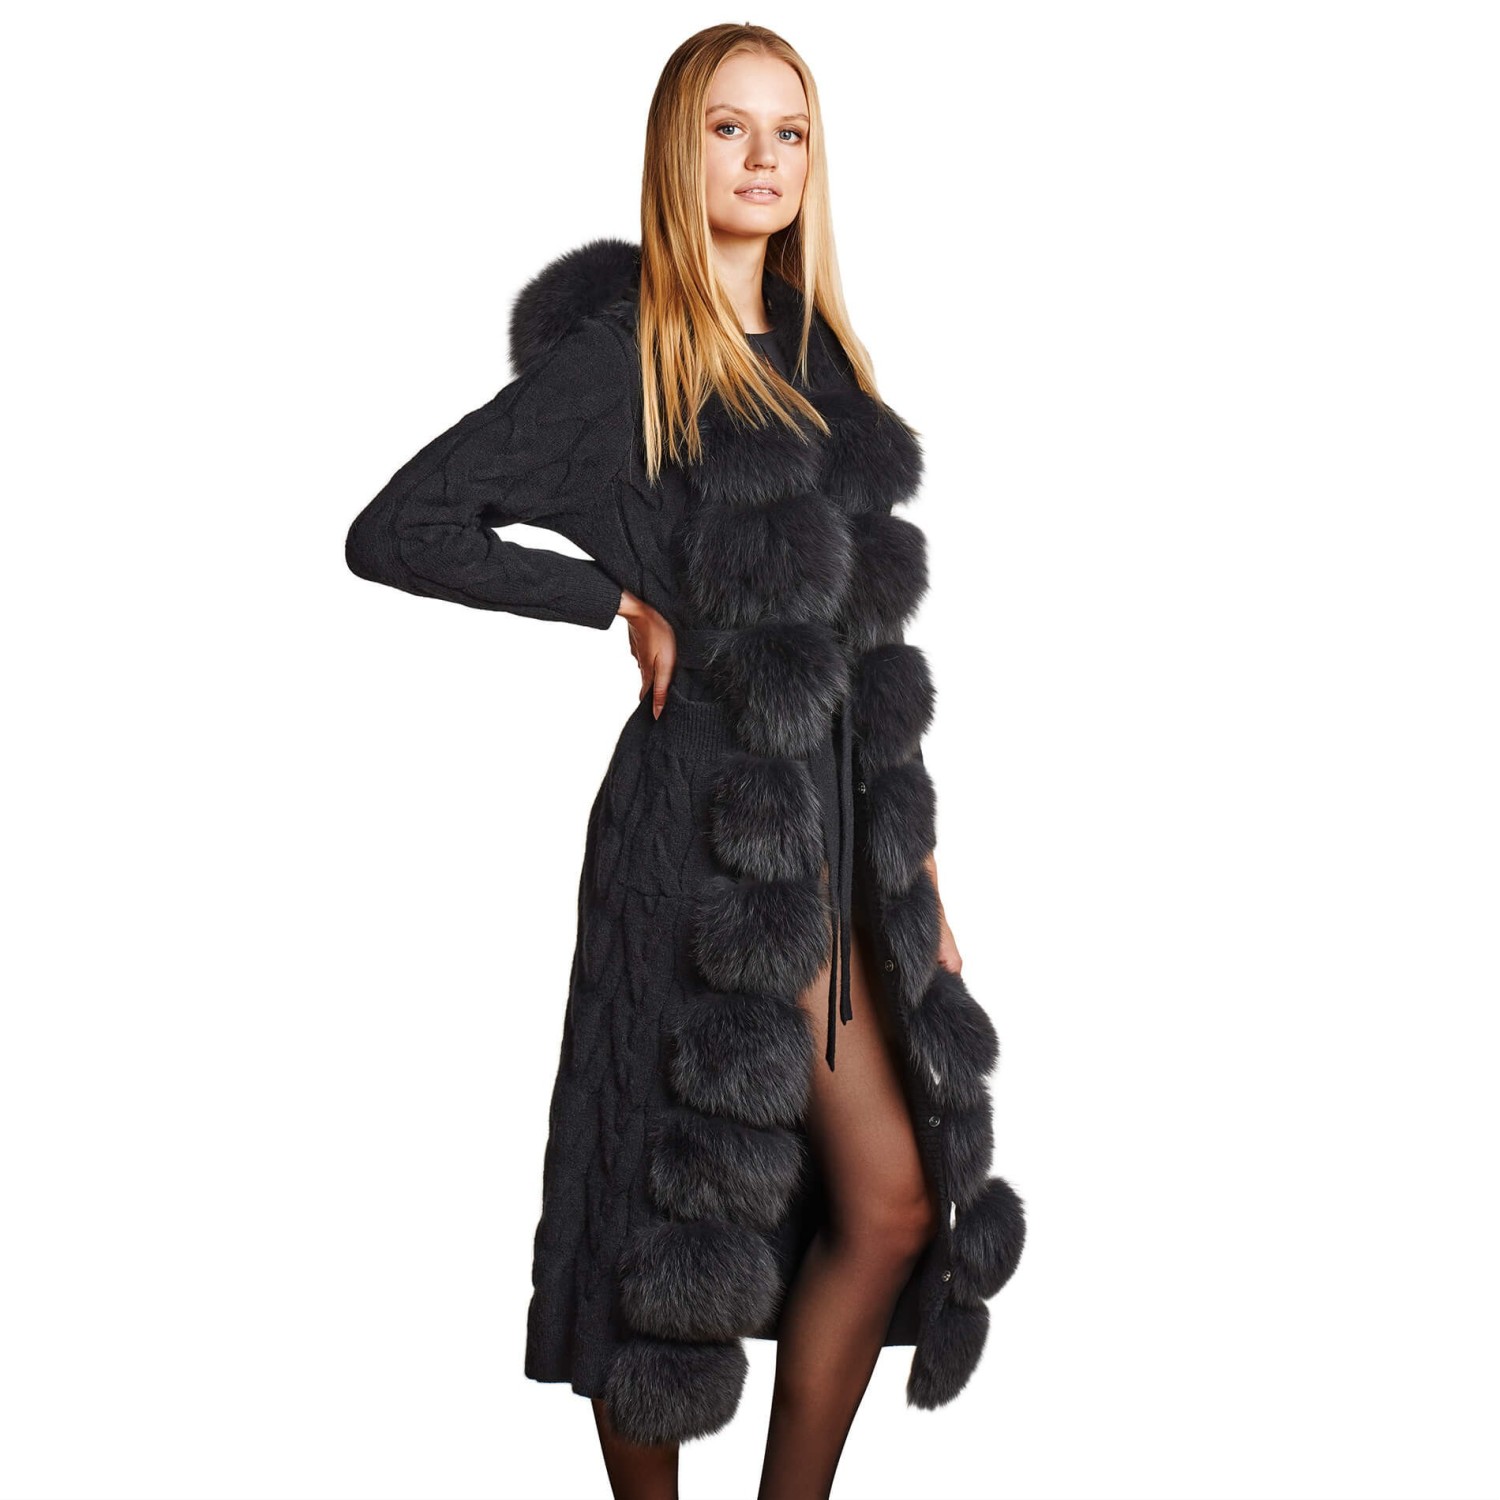 Coat with real fur